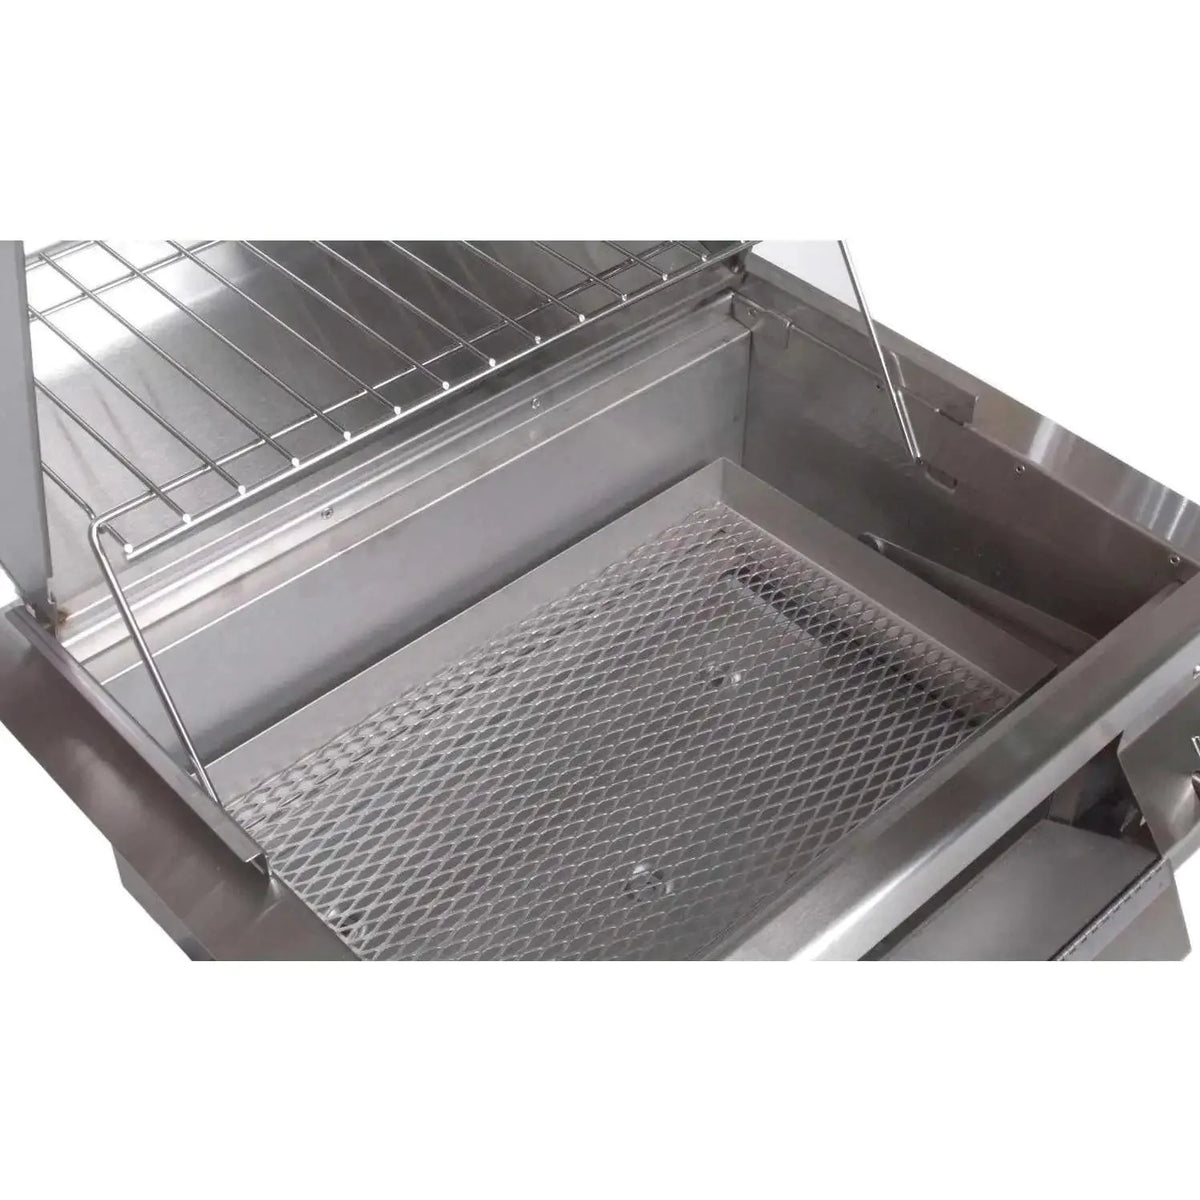 Fire Magic Legacy Charcoal Grill - Adjustable Charcoal Tray In Low Position